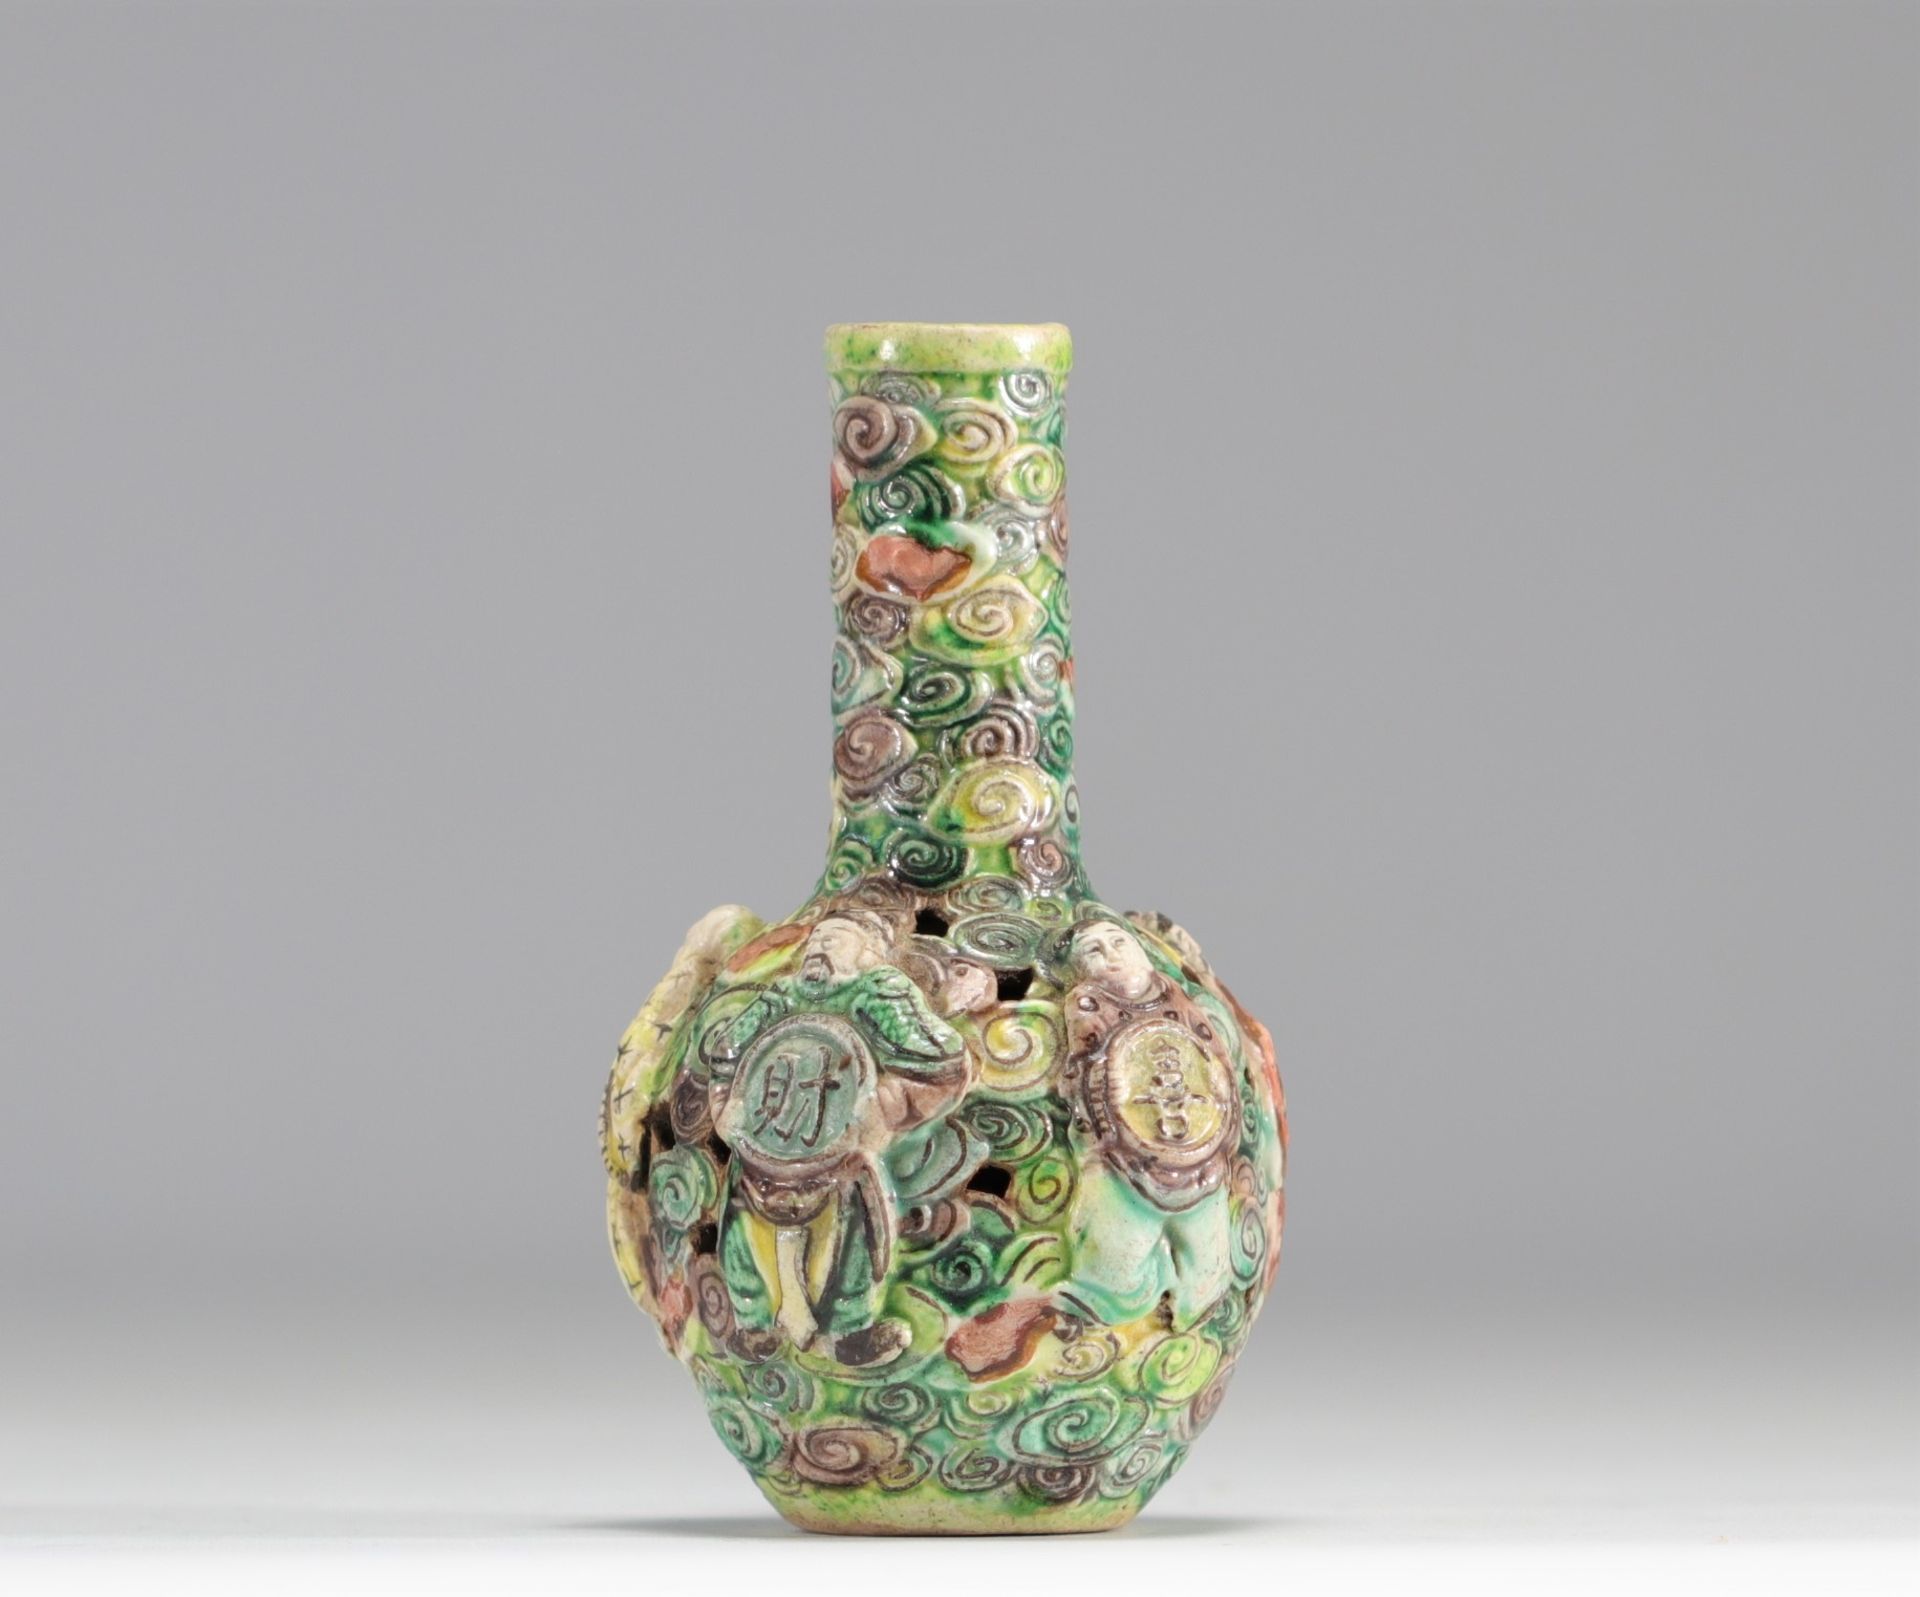 Small vase in relief from the Famille Verte decorated with figures